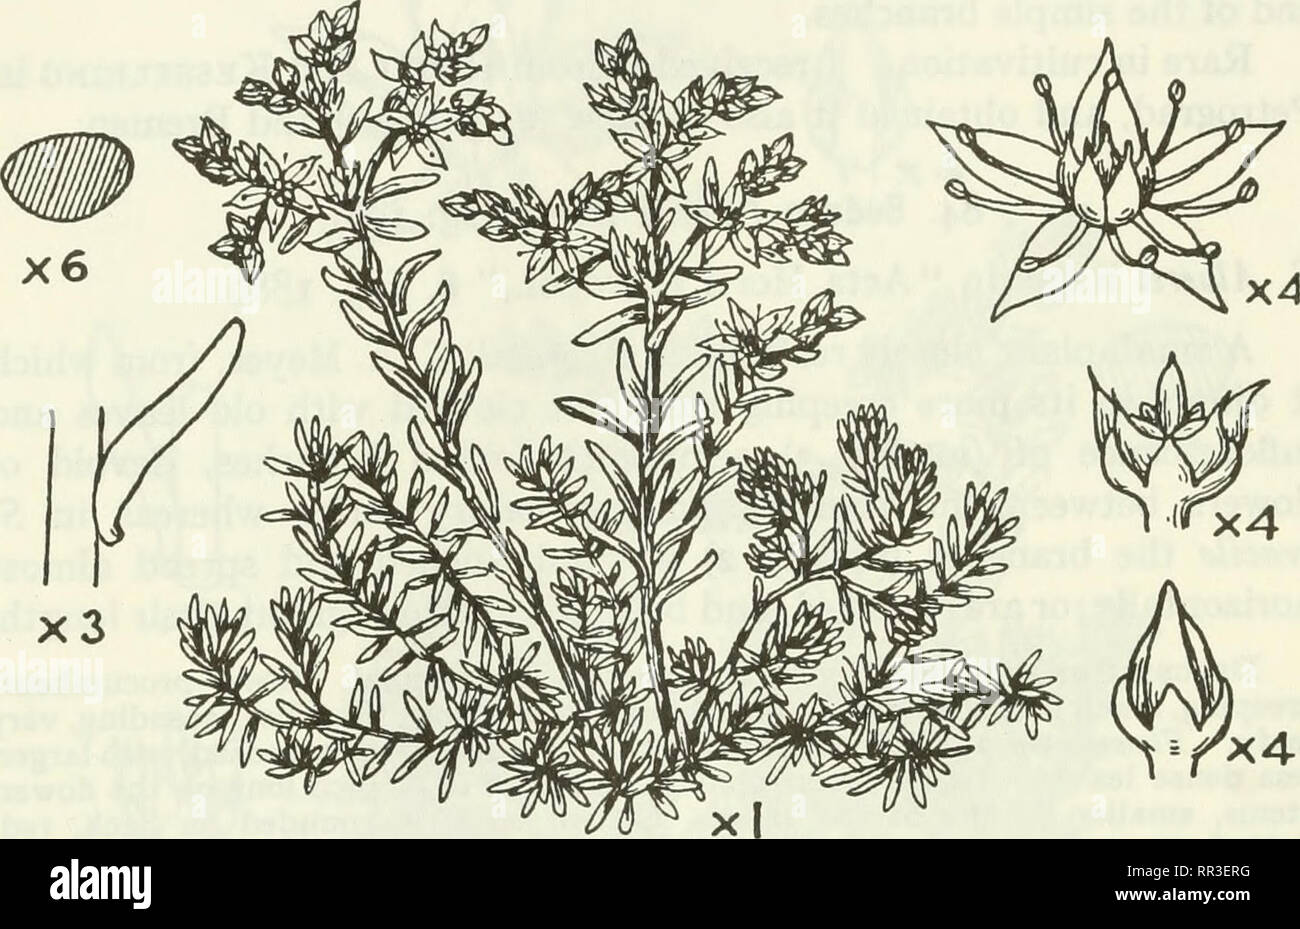 . An account of the genus Sedum as found in cultivation. Sedum; Crassulaceae. iqZ JOURNAL OF THE ROYAL HORTICULTURAL SOCIETY. 85. Sedum oxypetalum H. B. &amp; K. (fig. 109). 5. oxypetalum Humboldt, Bonpland and Kunth, &quot; Nov. Gen. et Sp.,&quot; 6, 45,1823. Hemsley, &quot; Biol. Centr. Amer., Bot.,&quot; 1,397. &quot; N. Amer. Flora,&quot; 22, 69. The most tree-like of the shrubby Sedums, forming a trunk-like stem which, in old plants, is several inches thick at the base and covered with rough,' brown bark. The bush tends to assume in greenhouses a rounded form and a height of 2 to 3 feet.  Stock Photo